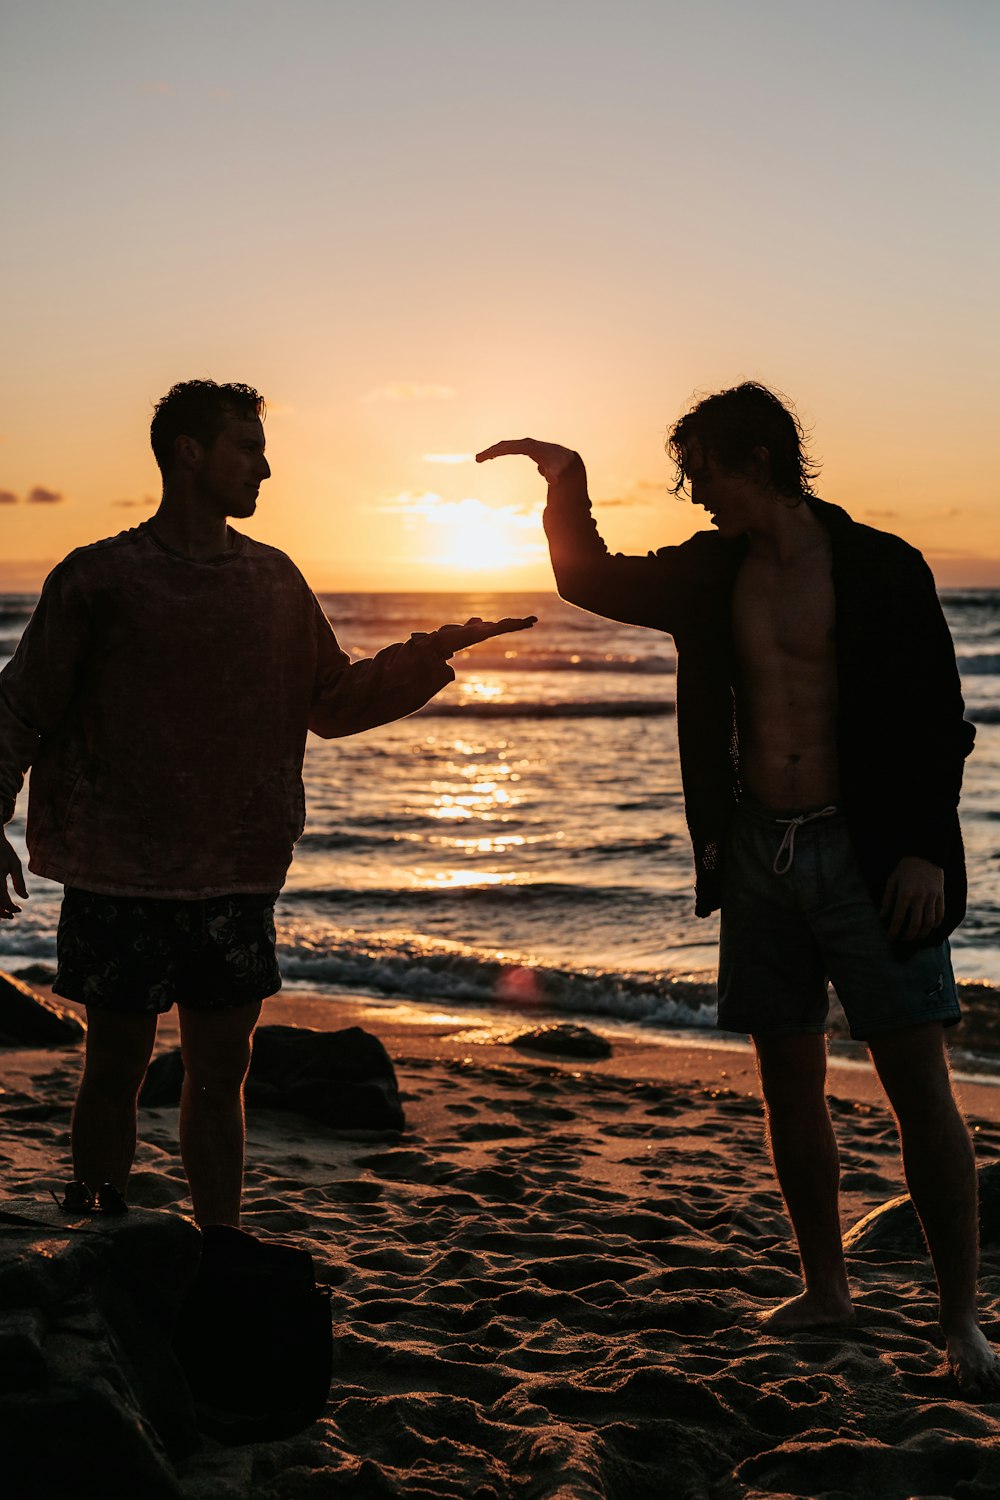 close-up photo of two men shaking hands near beach at sunset